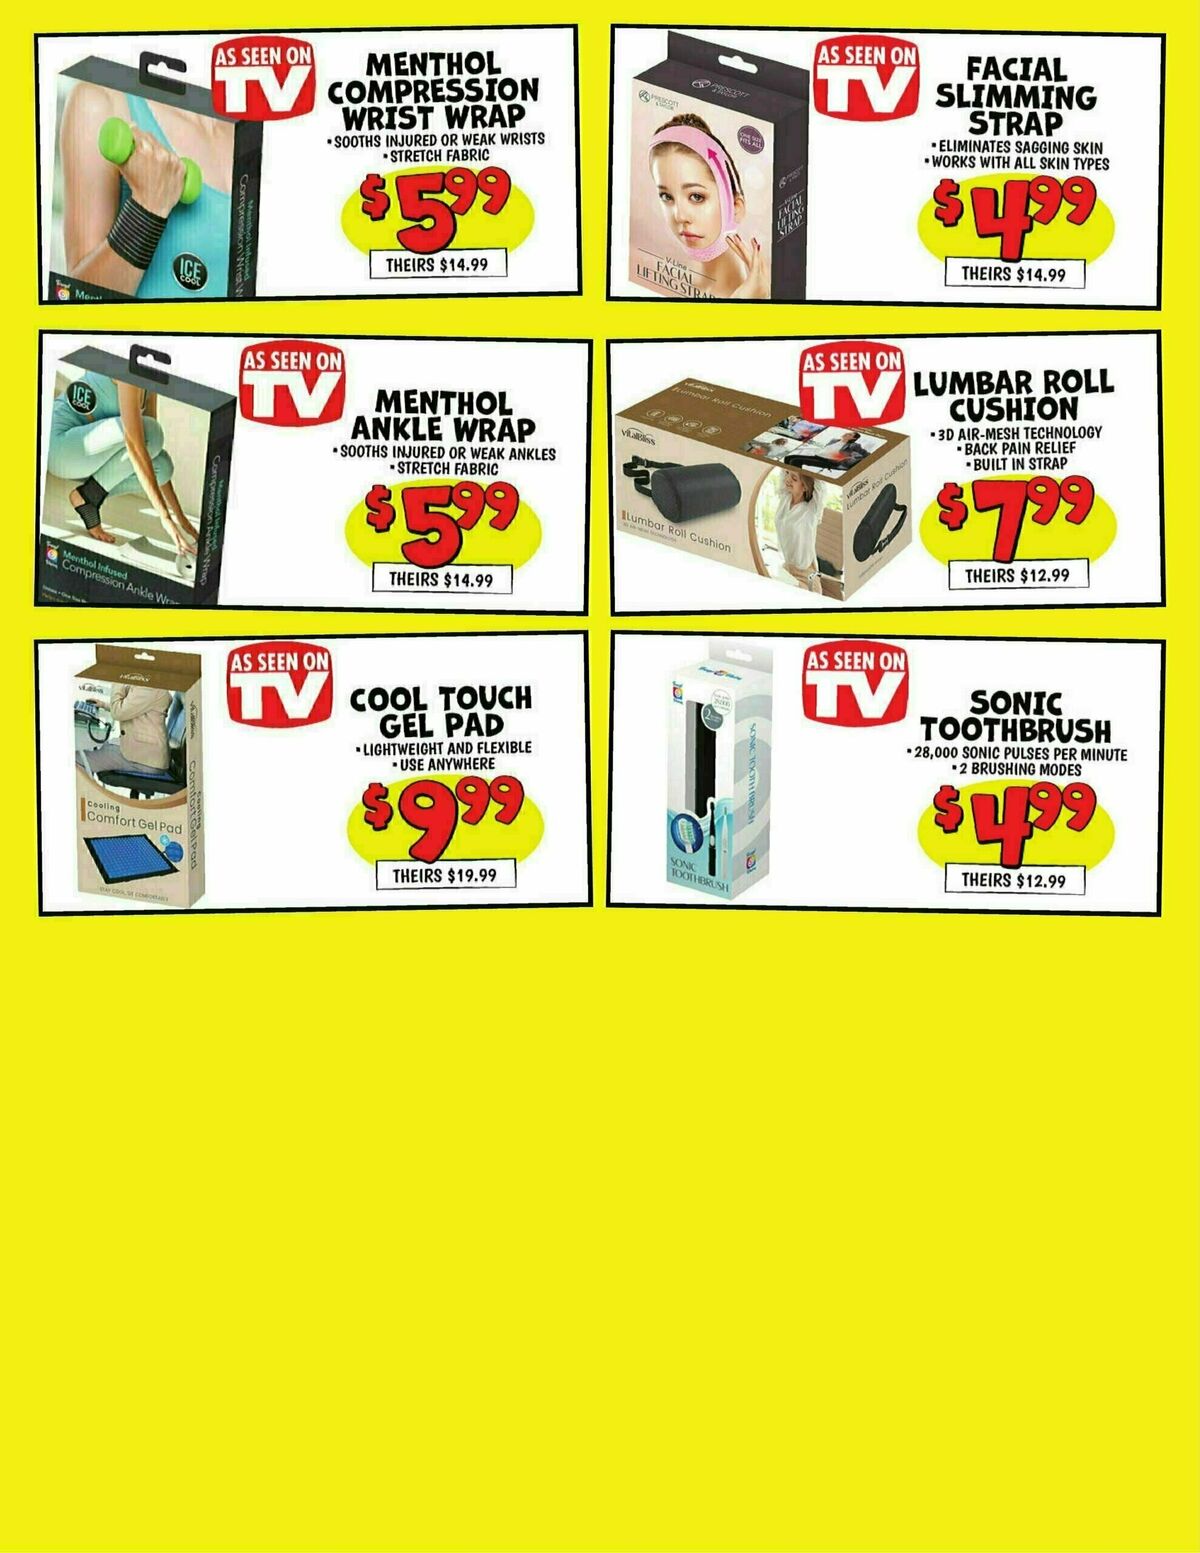 Ollie's Bargain Outlet Weekly Ad from February 1